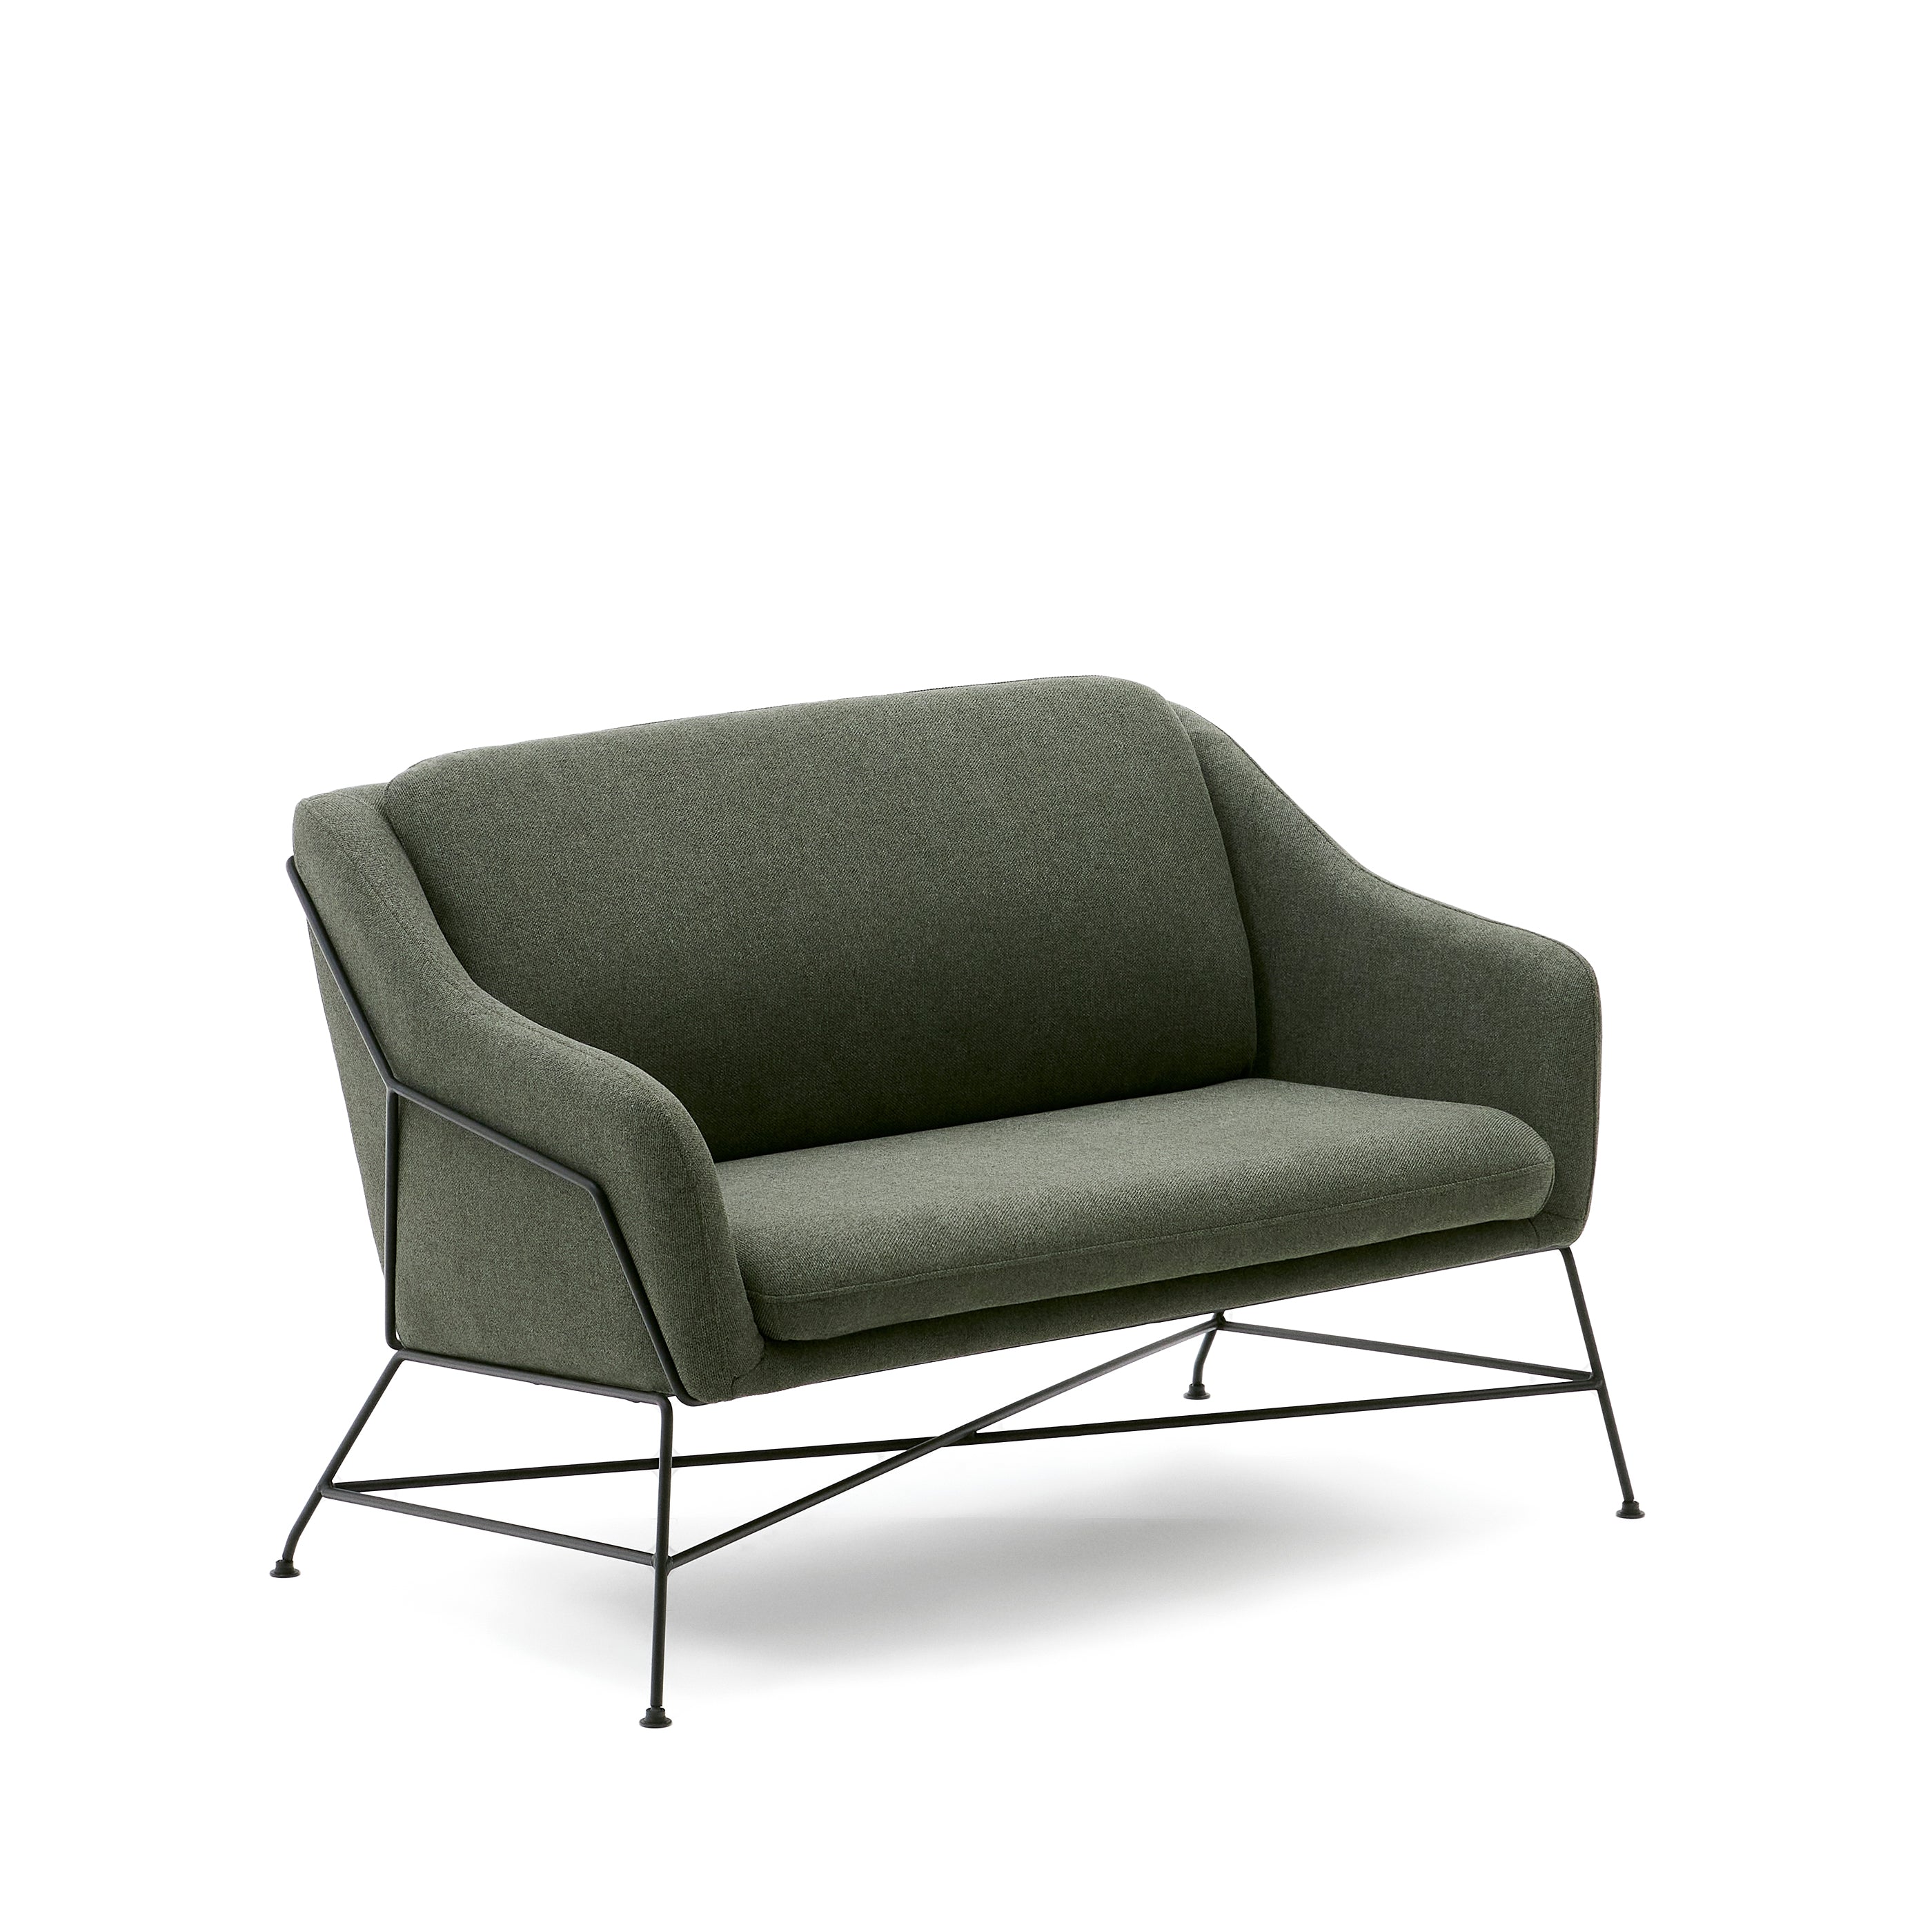 Brida 2-seater sofa in green and steel legs with black finish, 128 cm